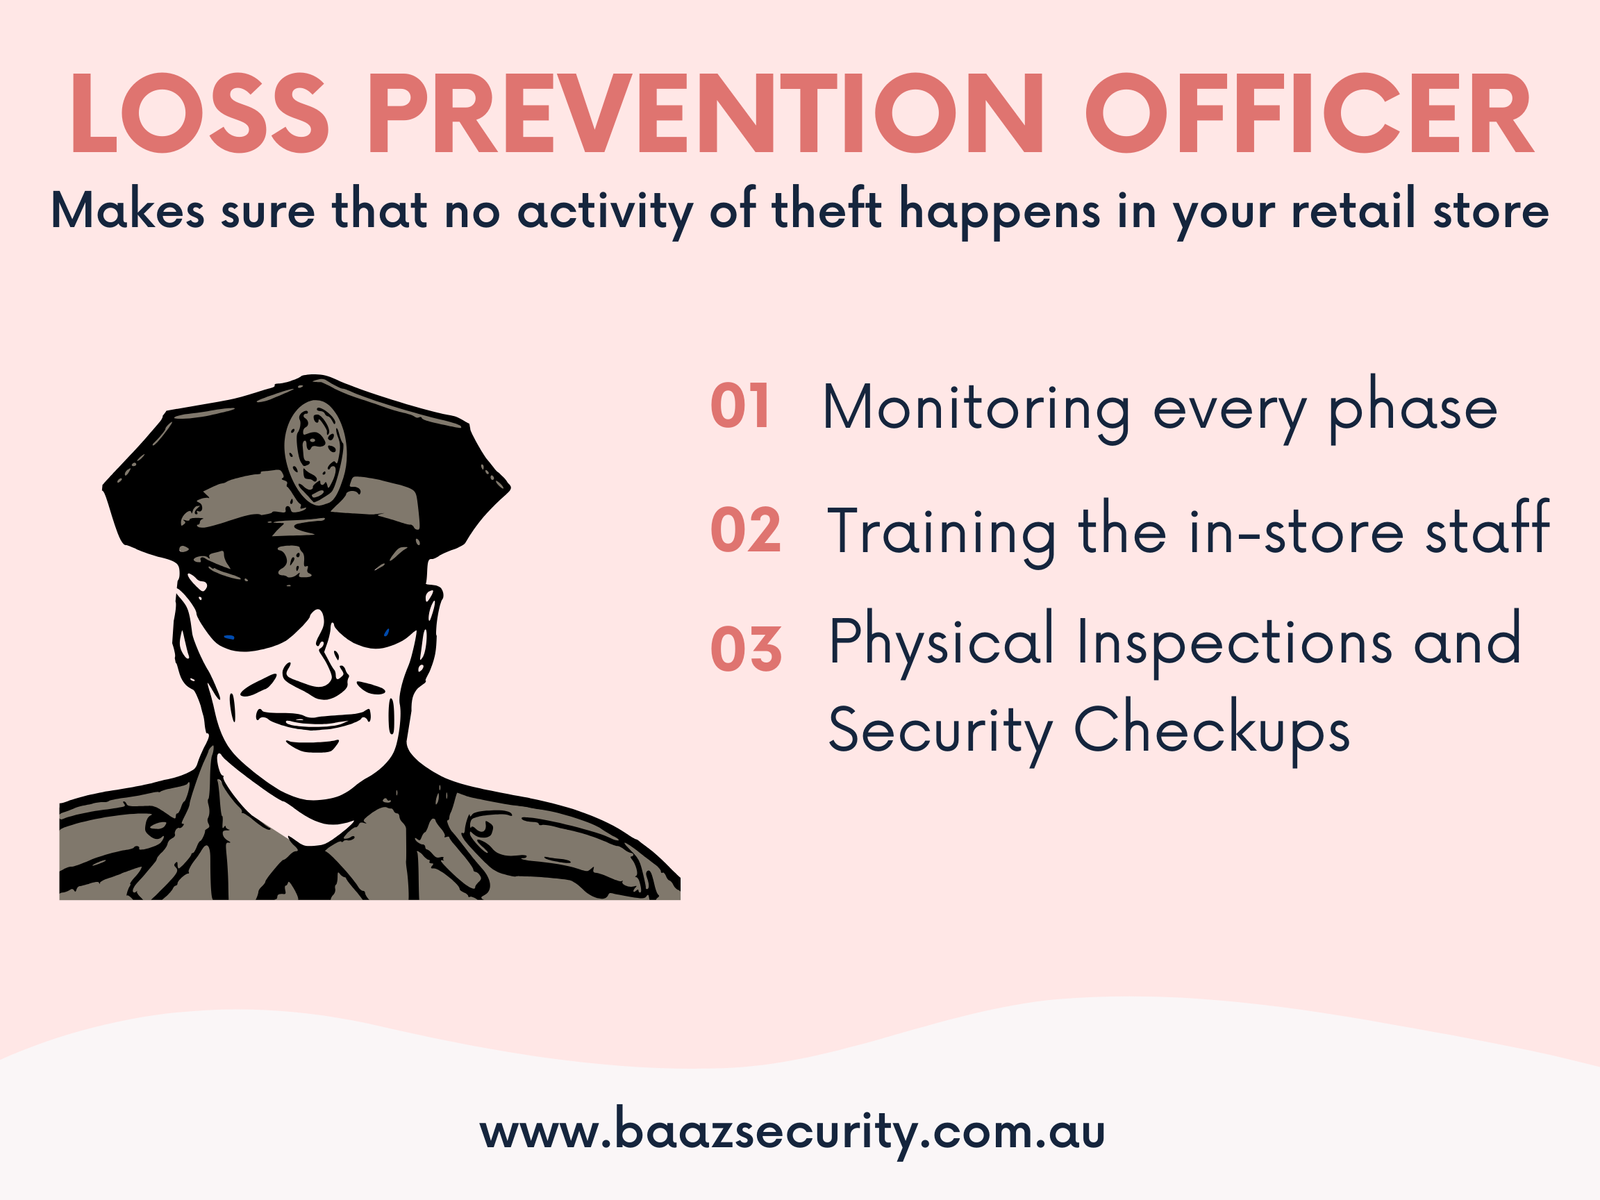 Who Is A Loss Prevention Officer?